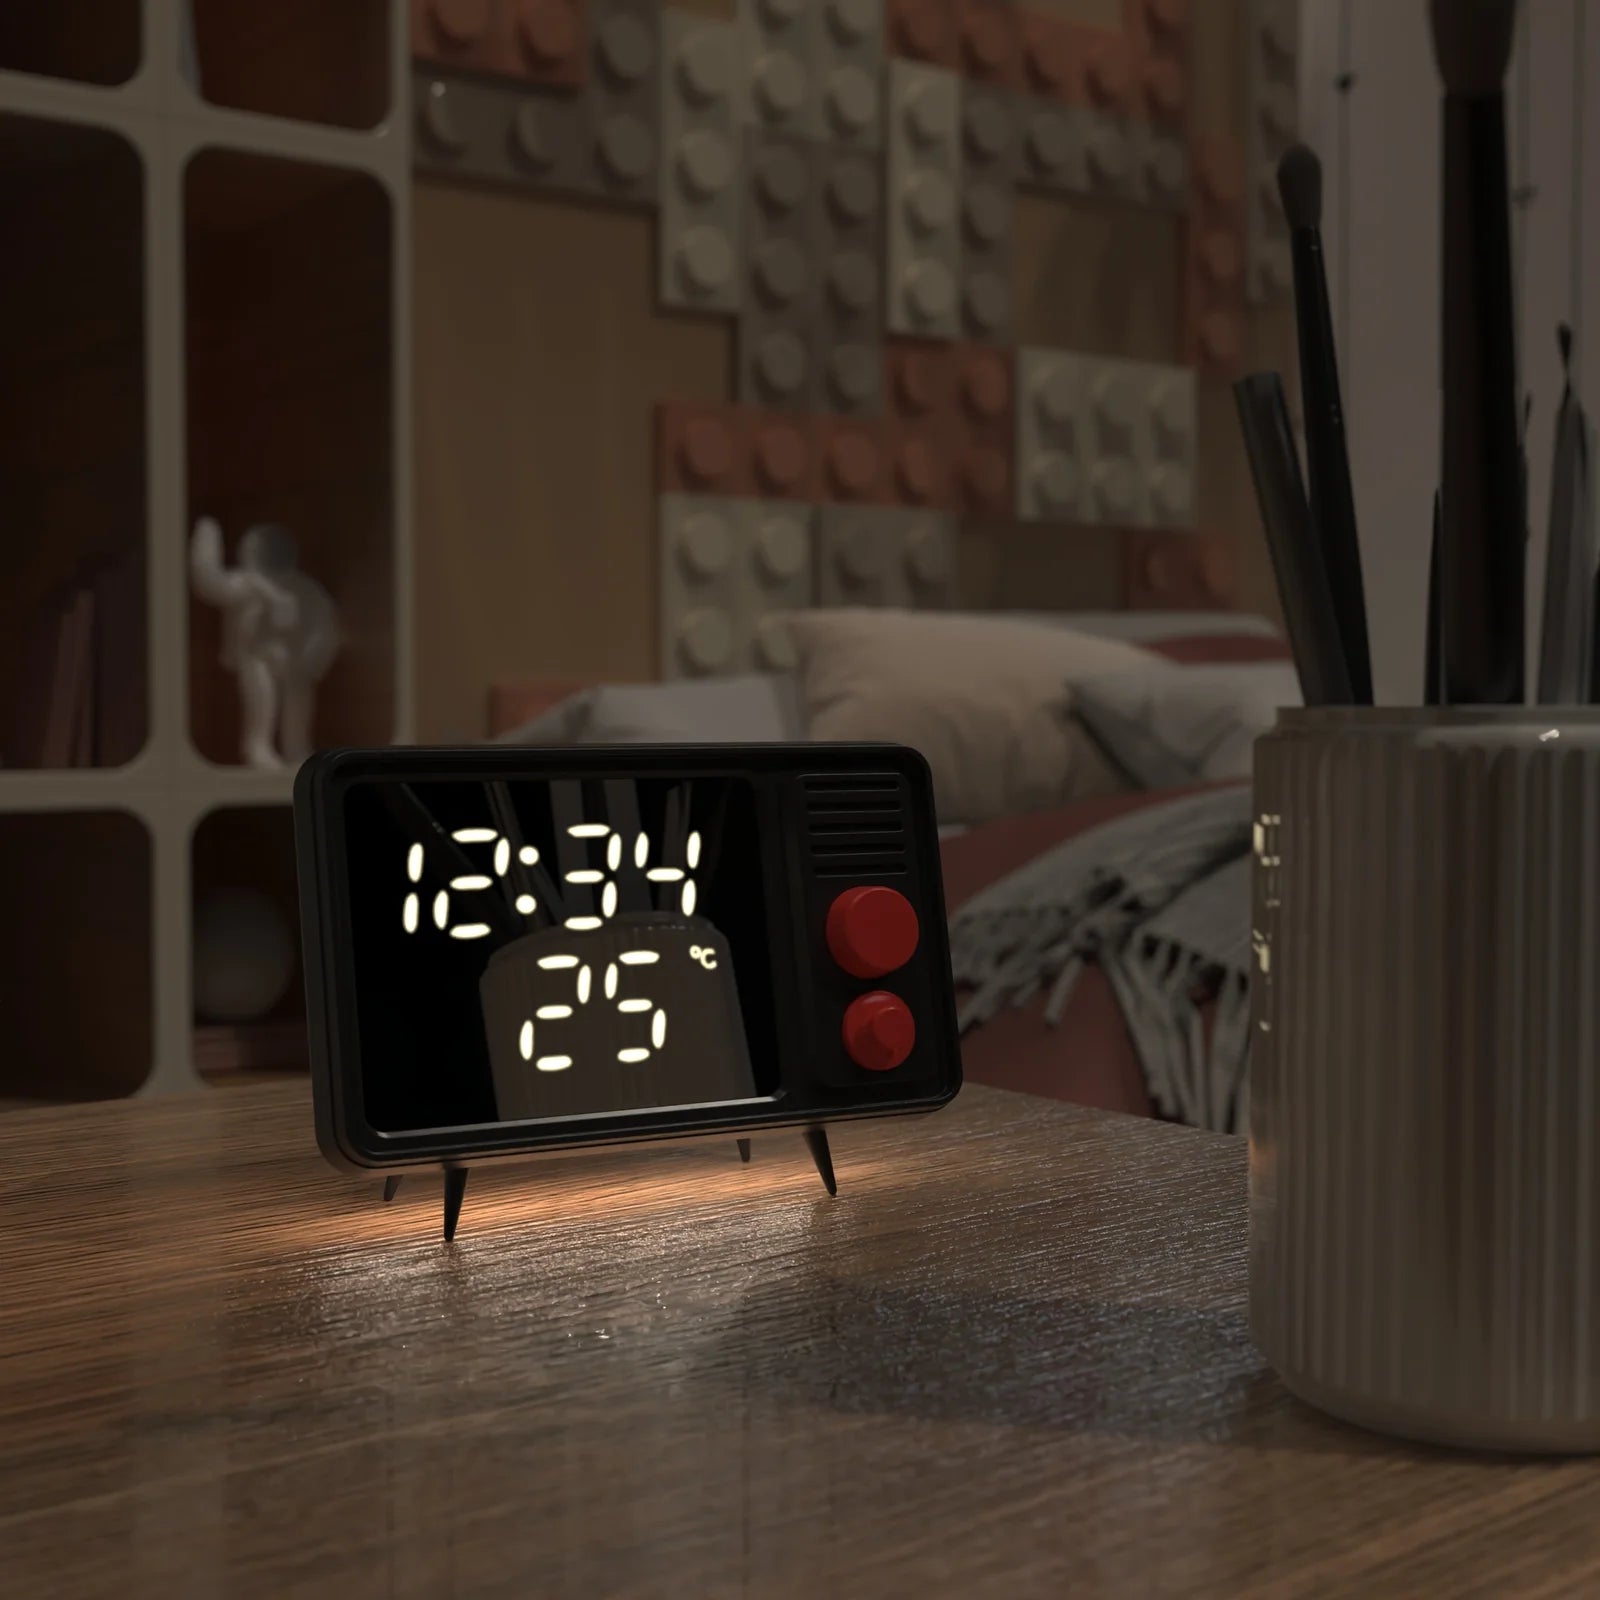 Clever Gadgets | MOB Vintage TV Alarm Clock by Weirs of Baggot Street